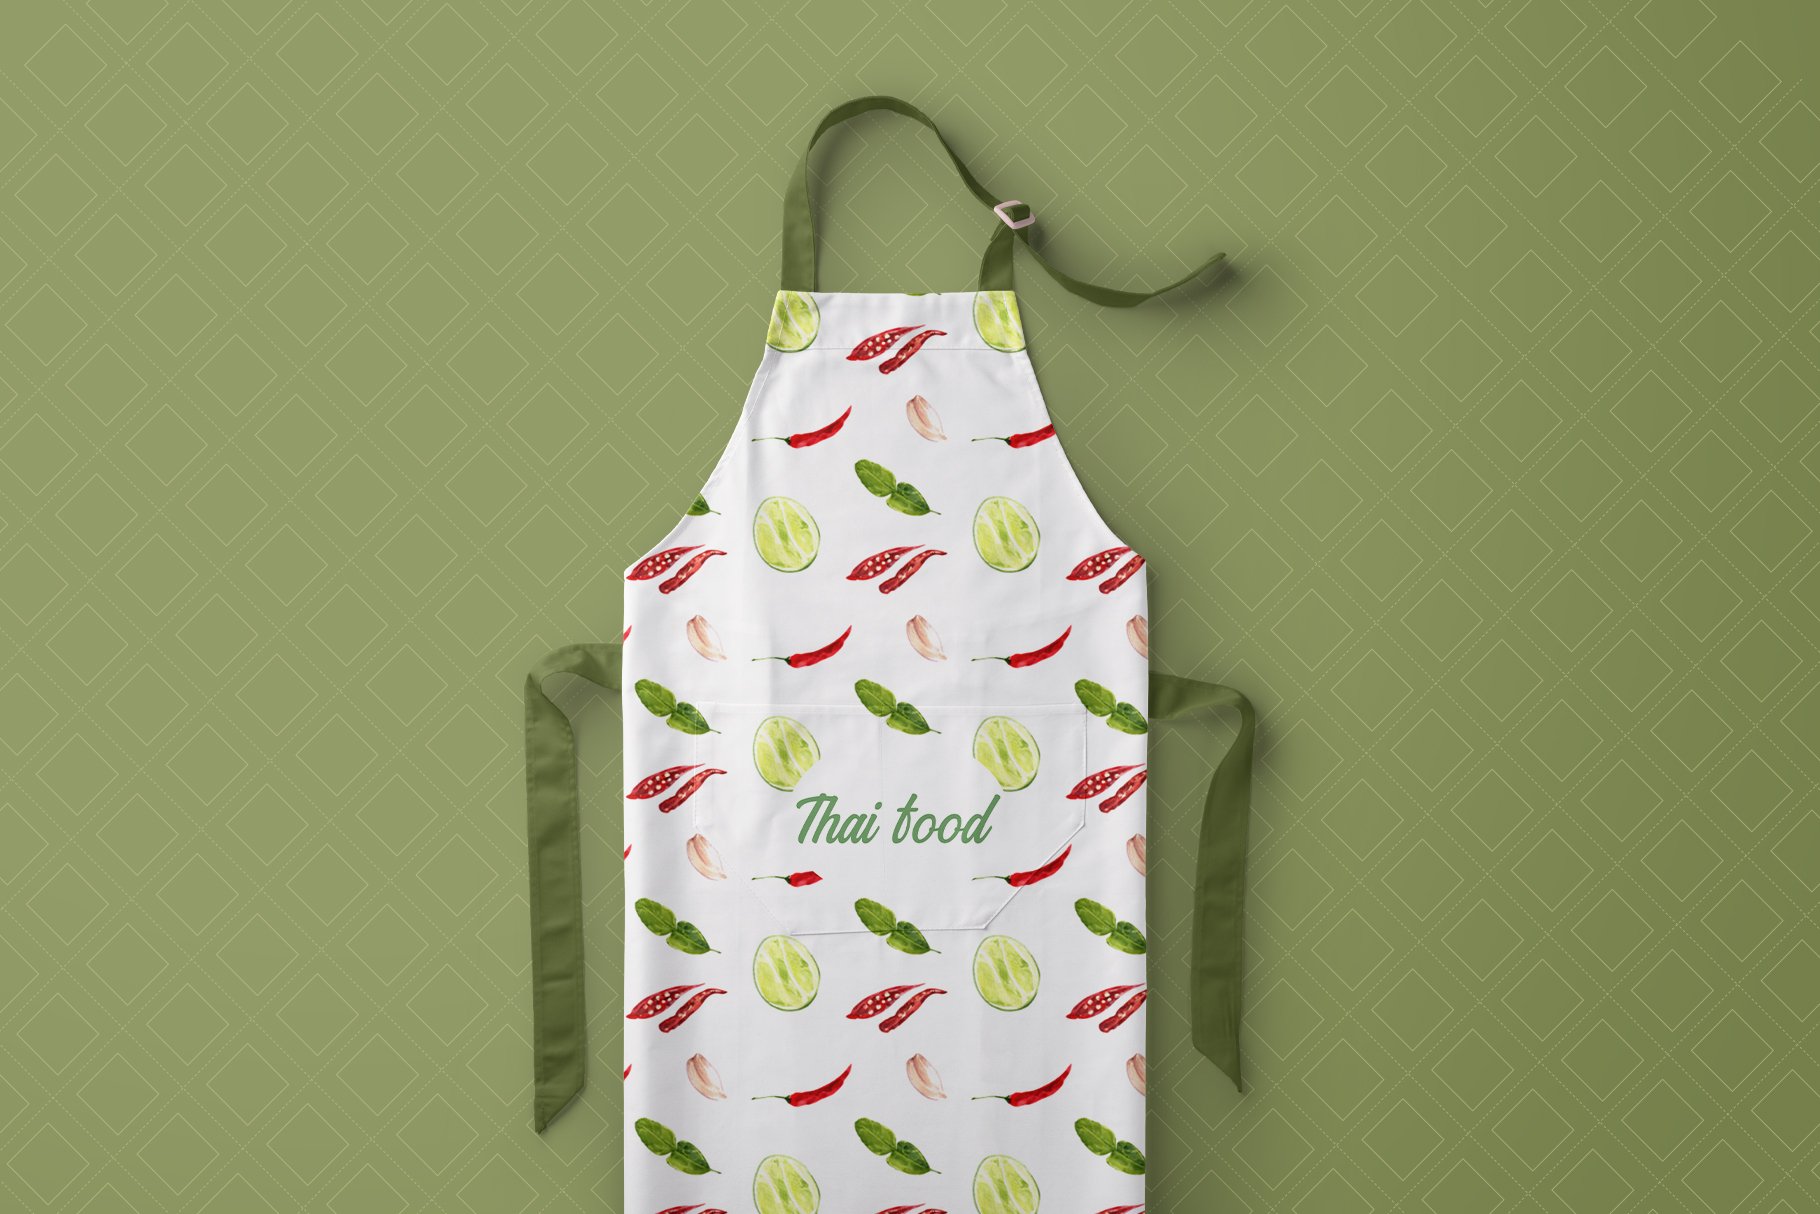 A special apron for thai food.